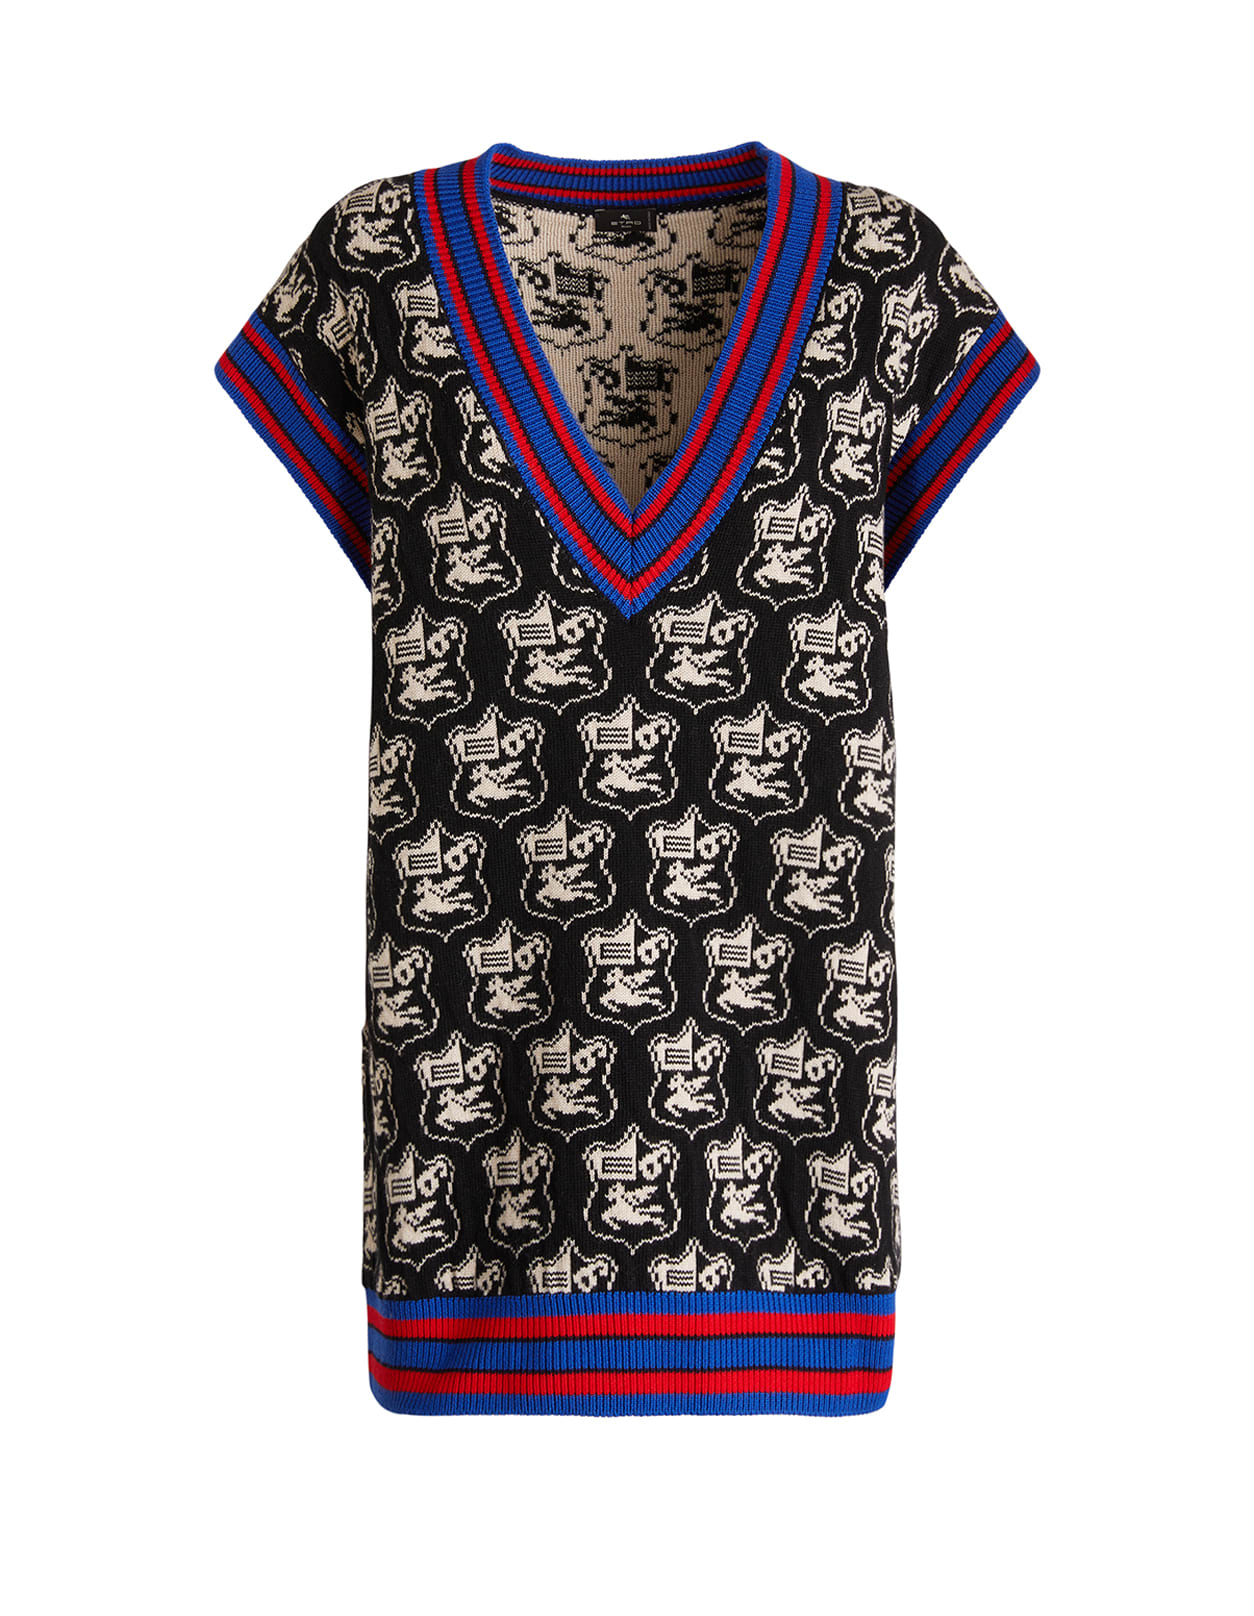 ETRO WOMAN VEST IN BLACK JACQUARD KNIT WITH PEGASUS HERALDIC ARMS